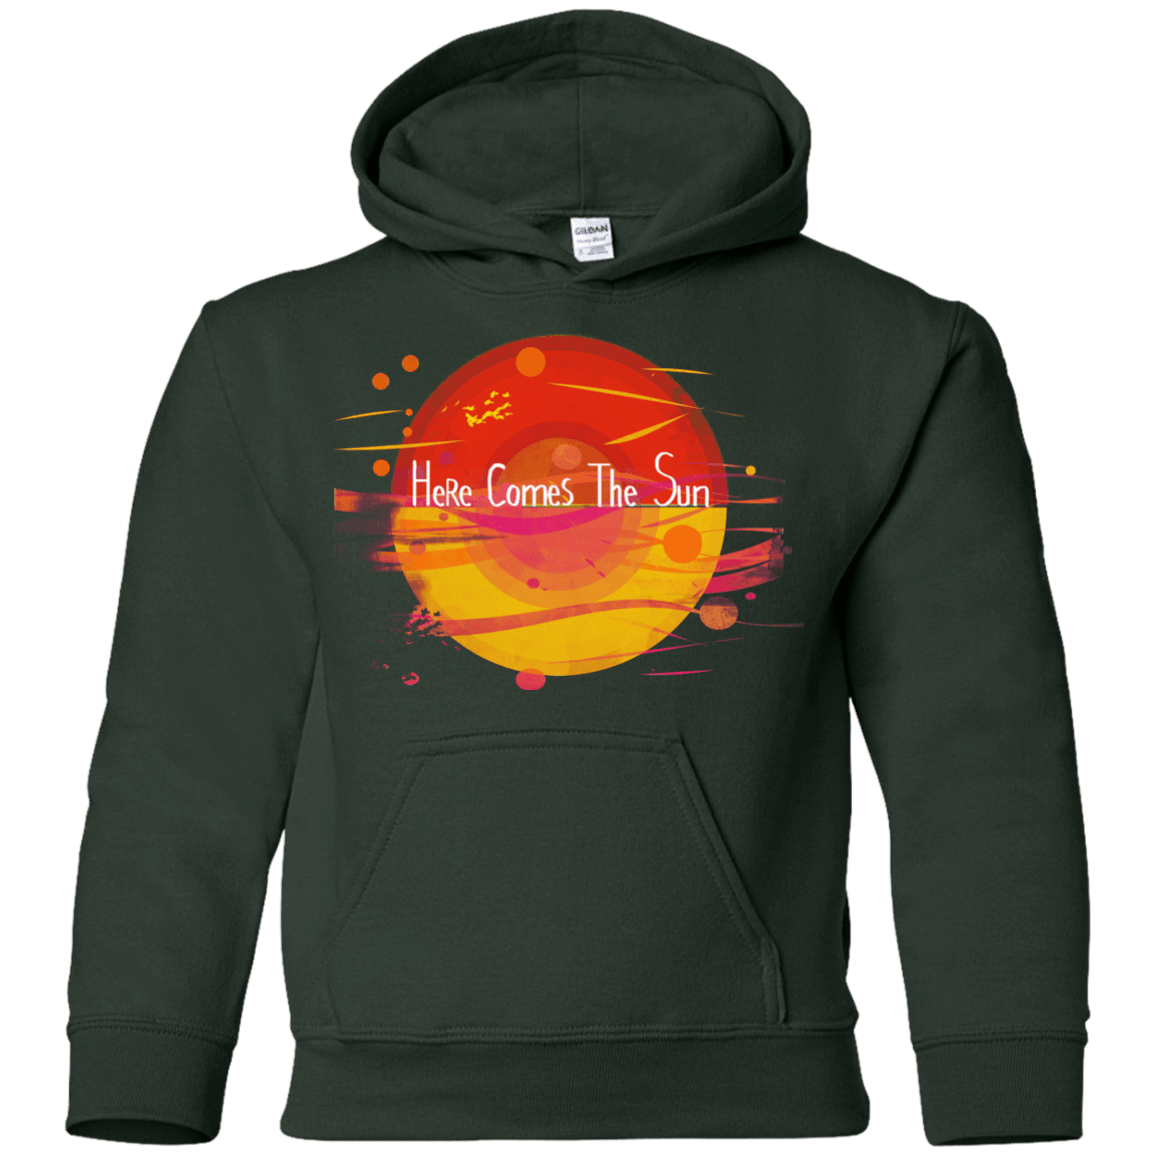 Sweatshirts Forest Green / YS Here Comes The Sun (1) Youth Hoodie